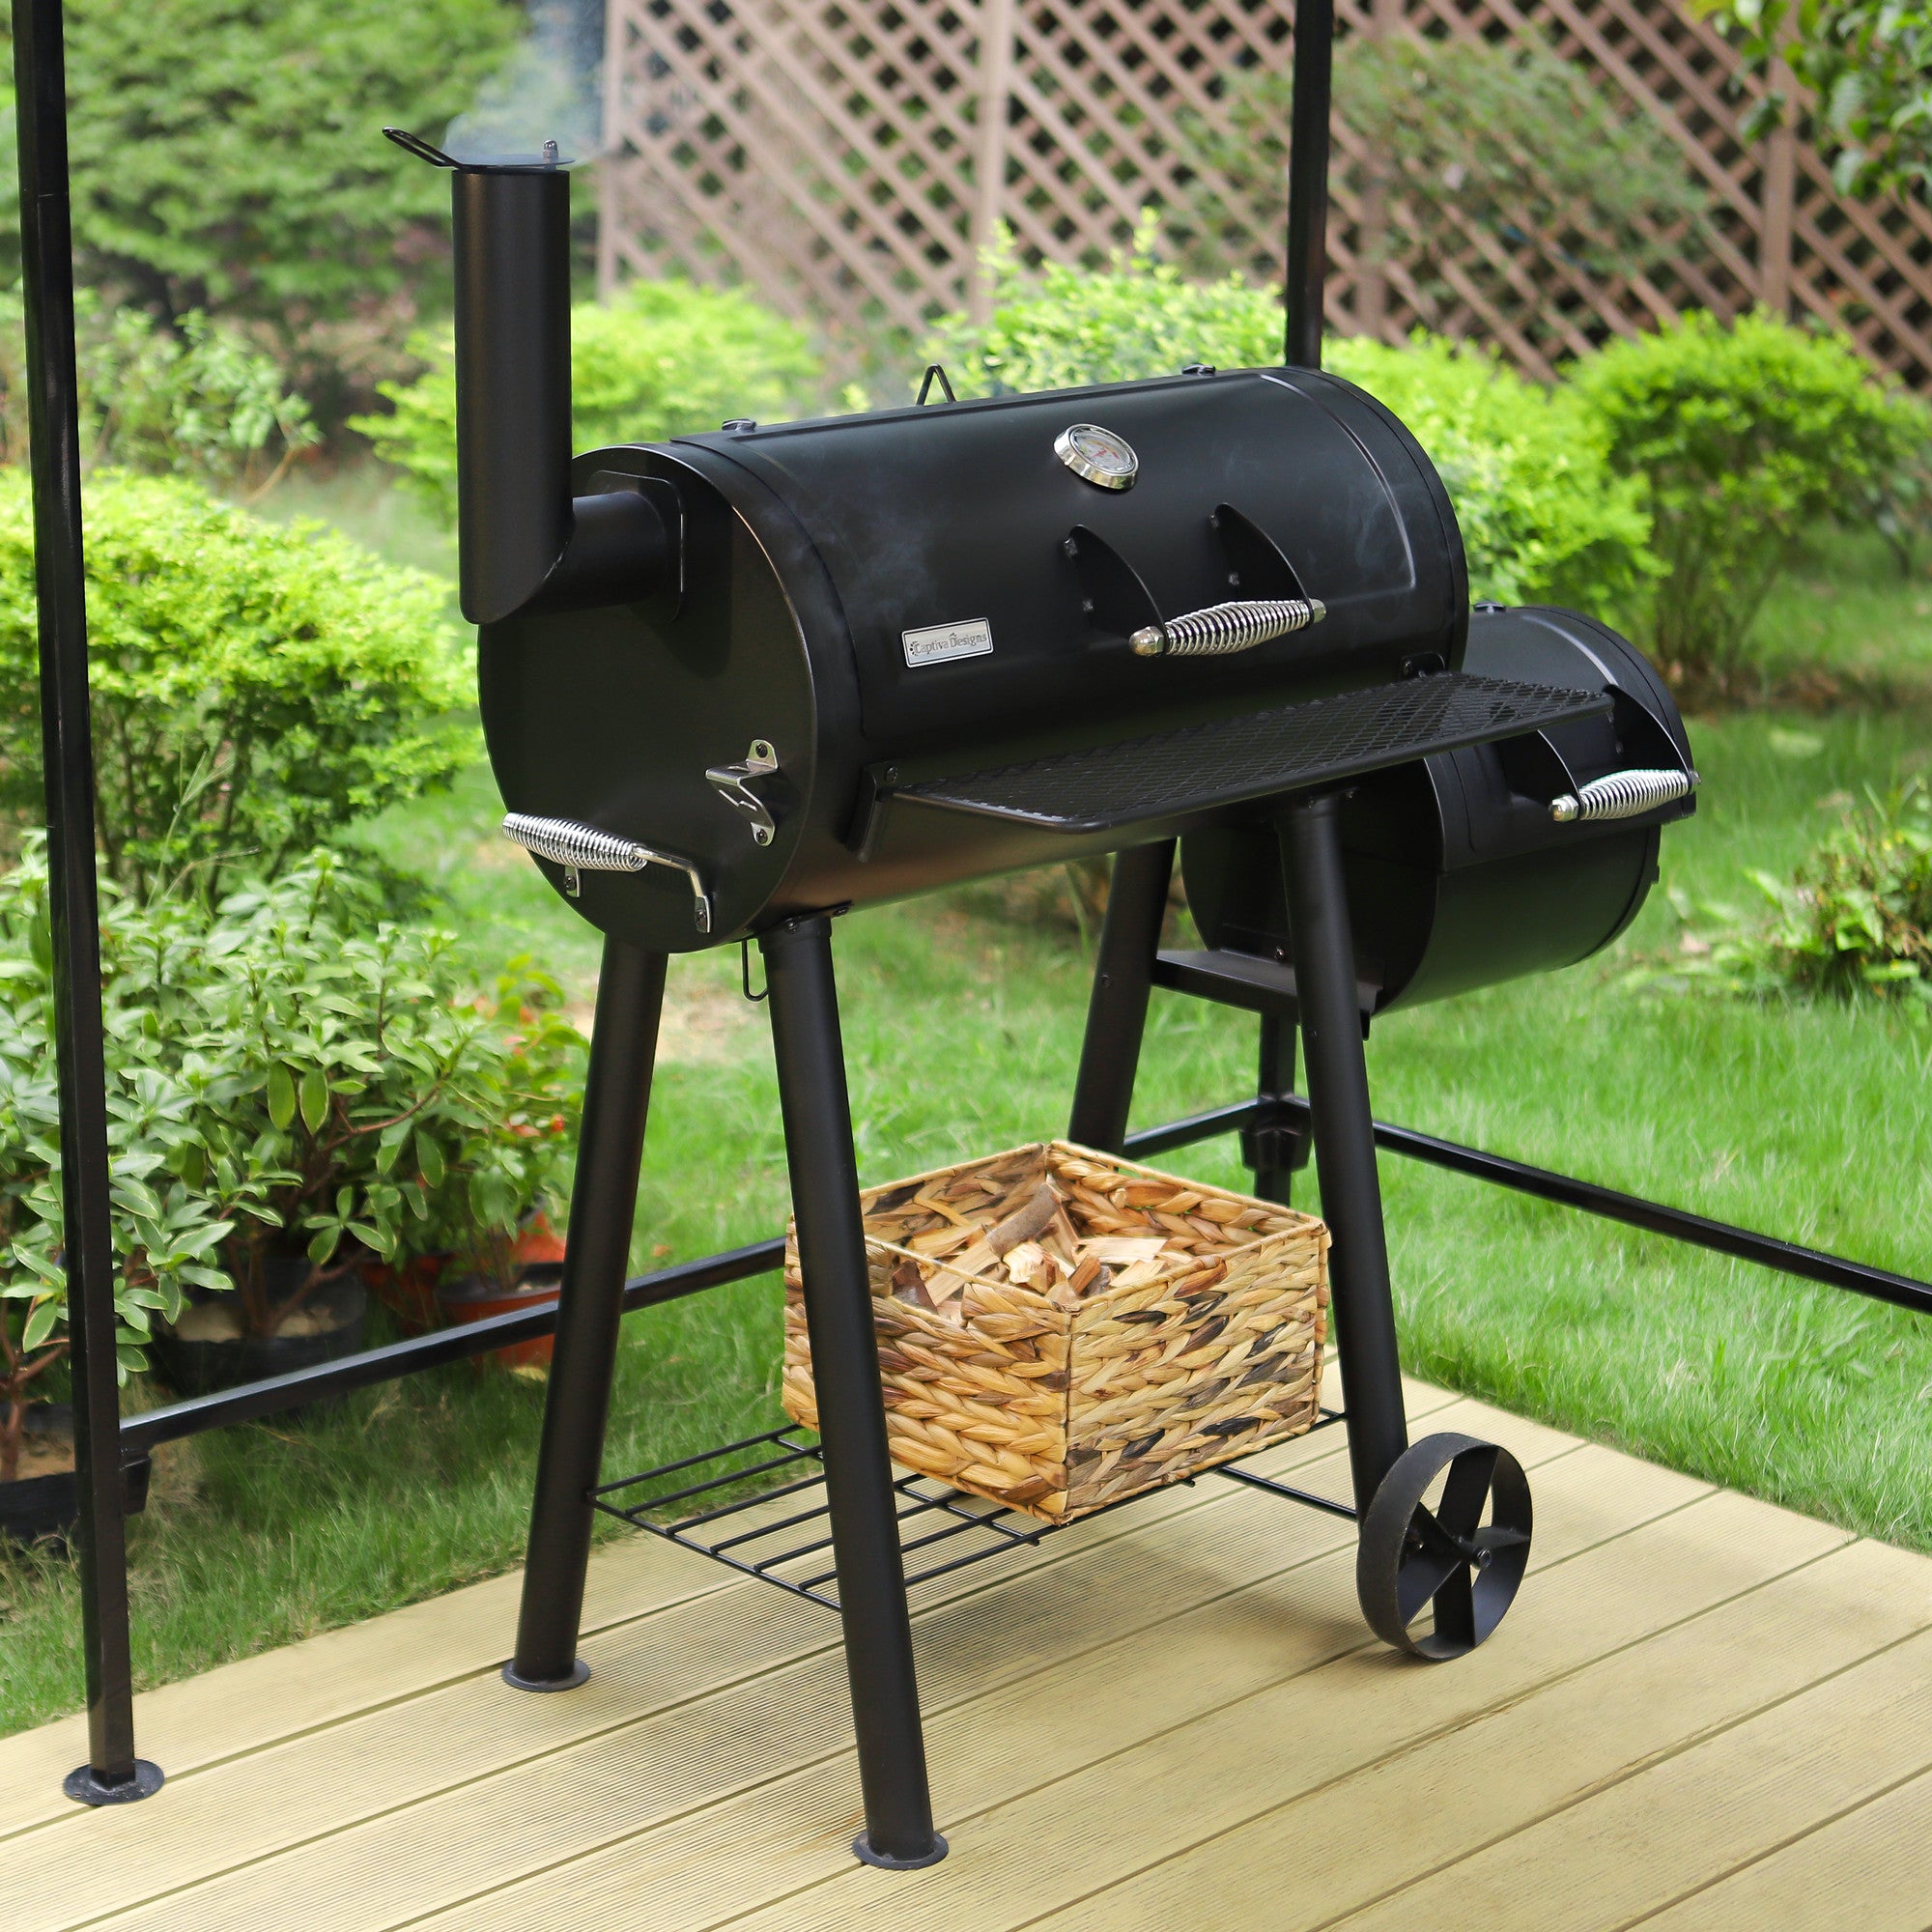 Sophia & William Portable BBQ Charcoal Grill with Offset Smoker, Black - image 2 of 10